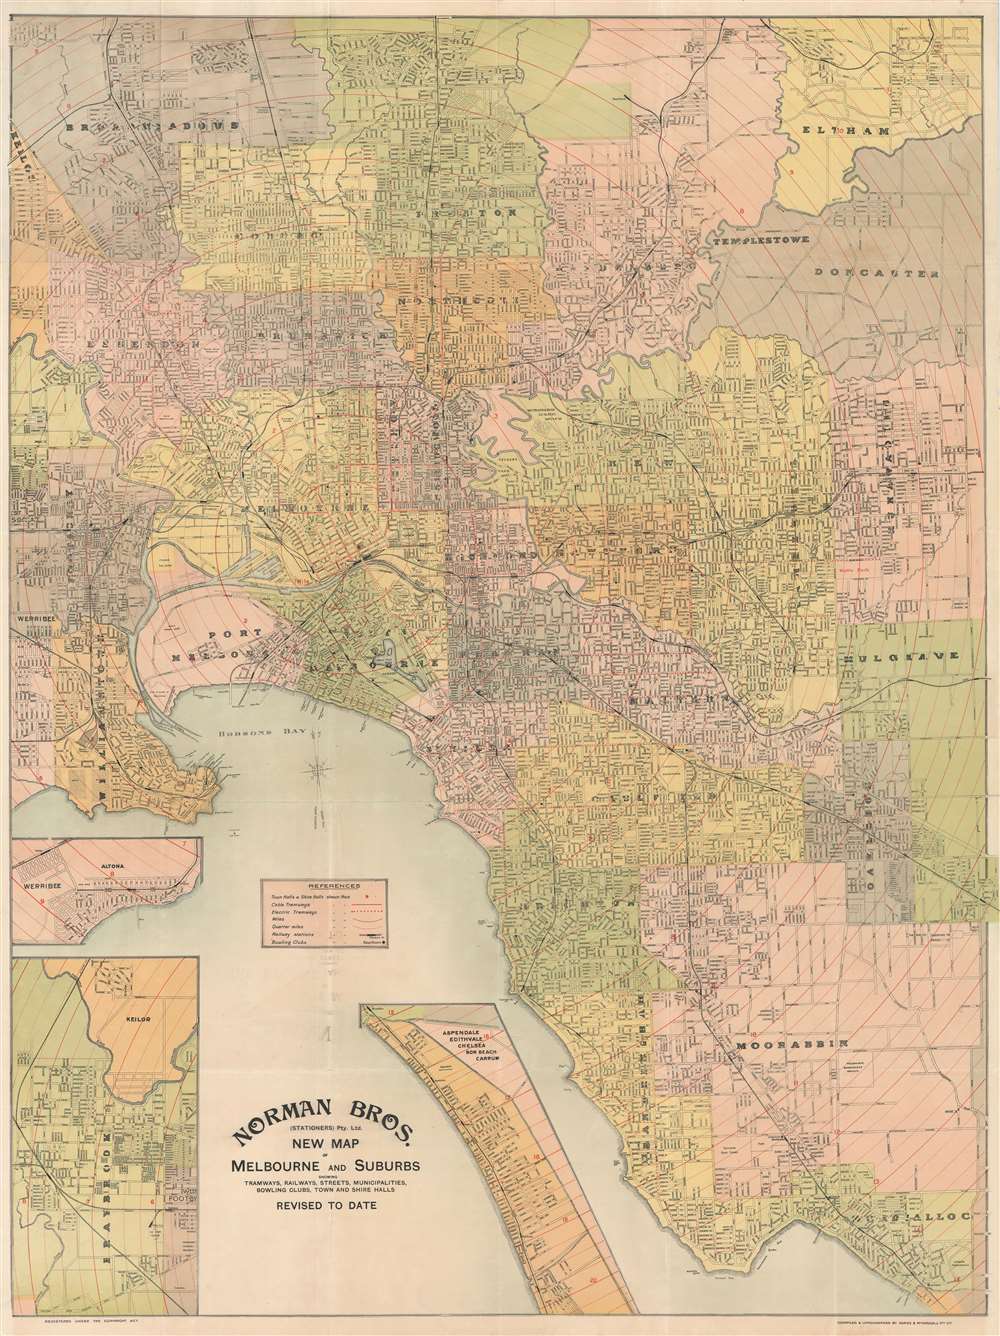 Norman Bros. New Map of Melbourne and Suburbs. - Main View